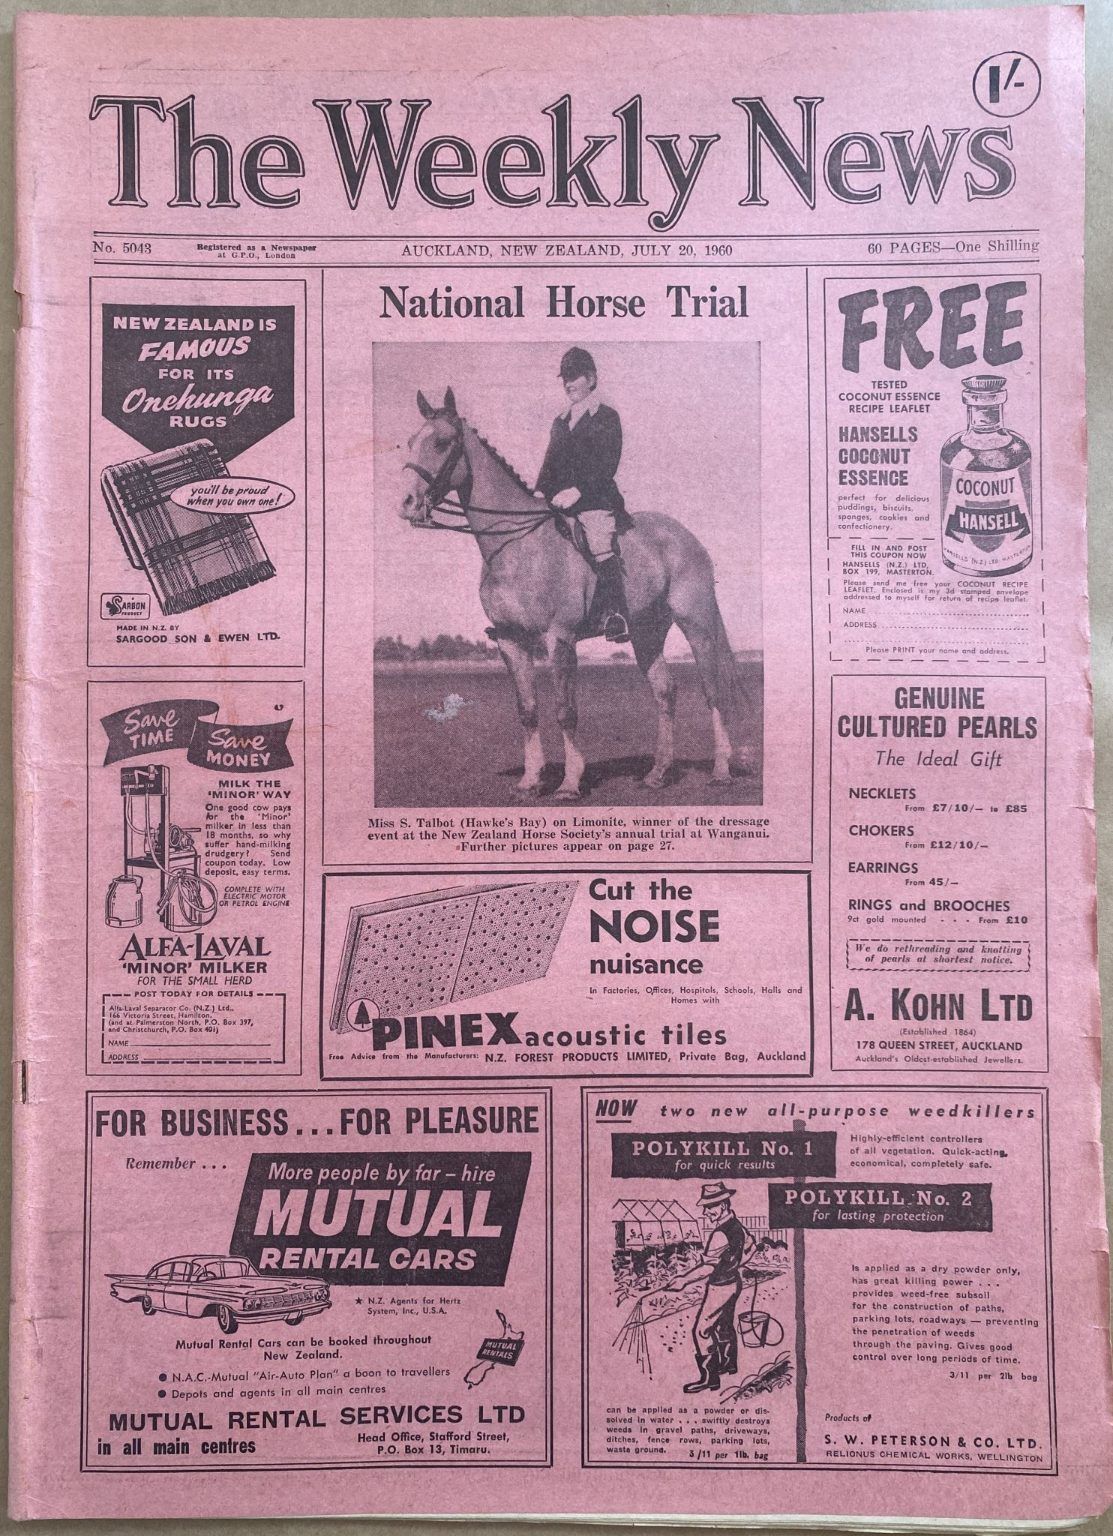 OLD NEWSPAPER: The Weekly News, No. 5043, 20 July 1960